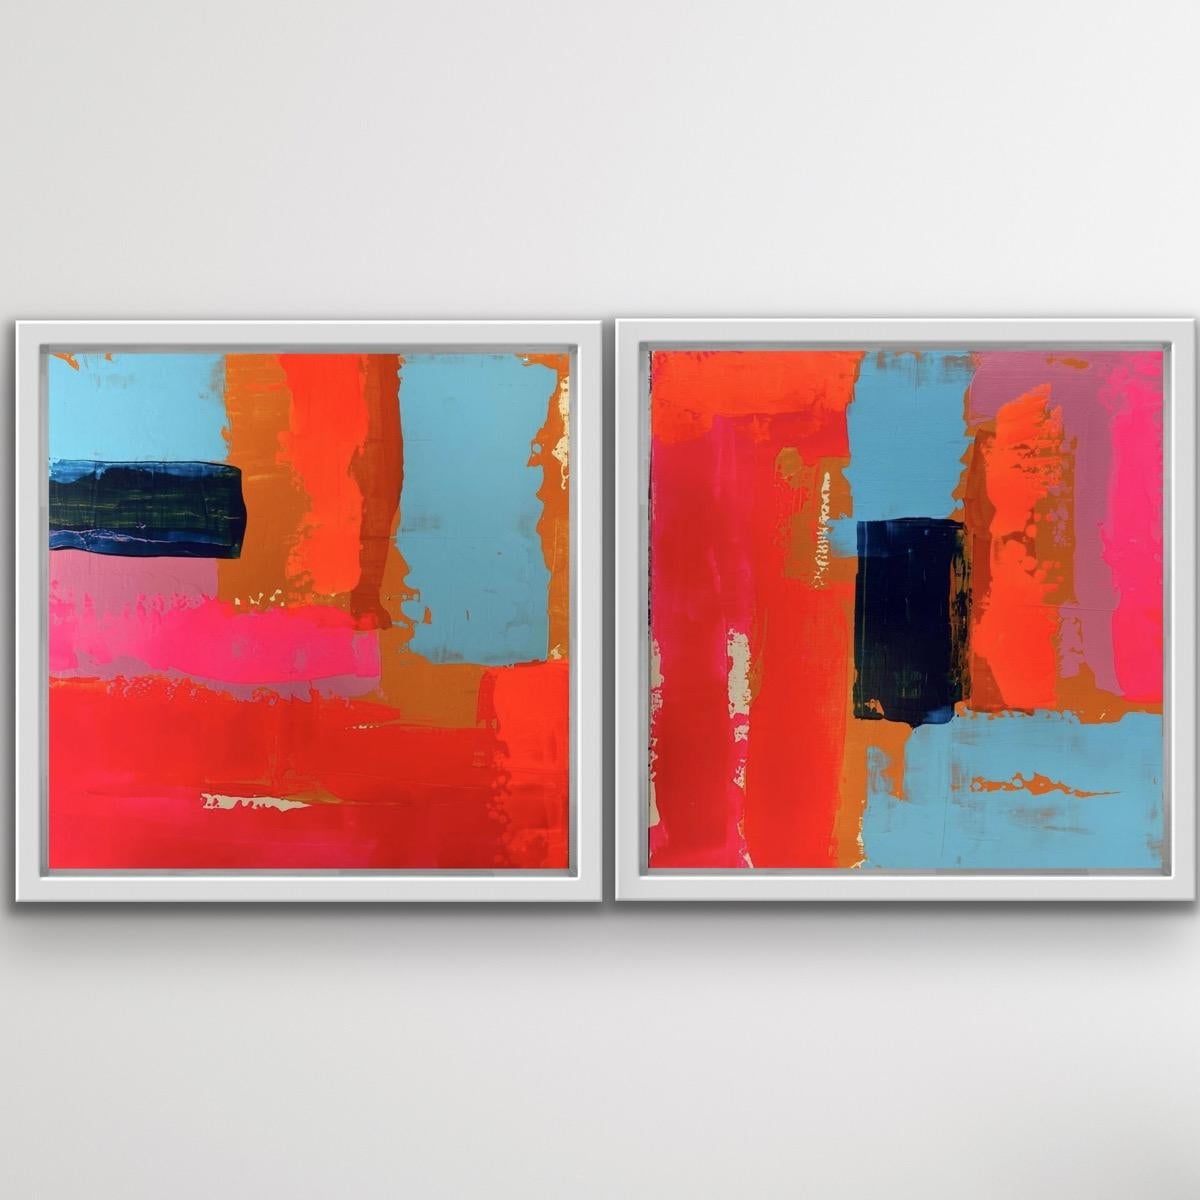 Jam Spread and Jam Line Diptych - Painting by Ella Freire